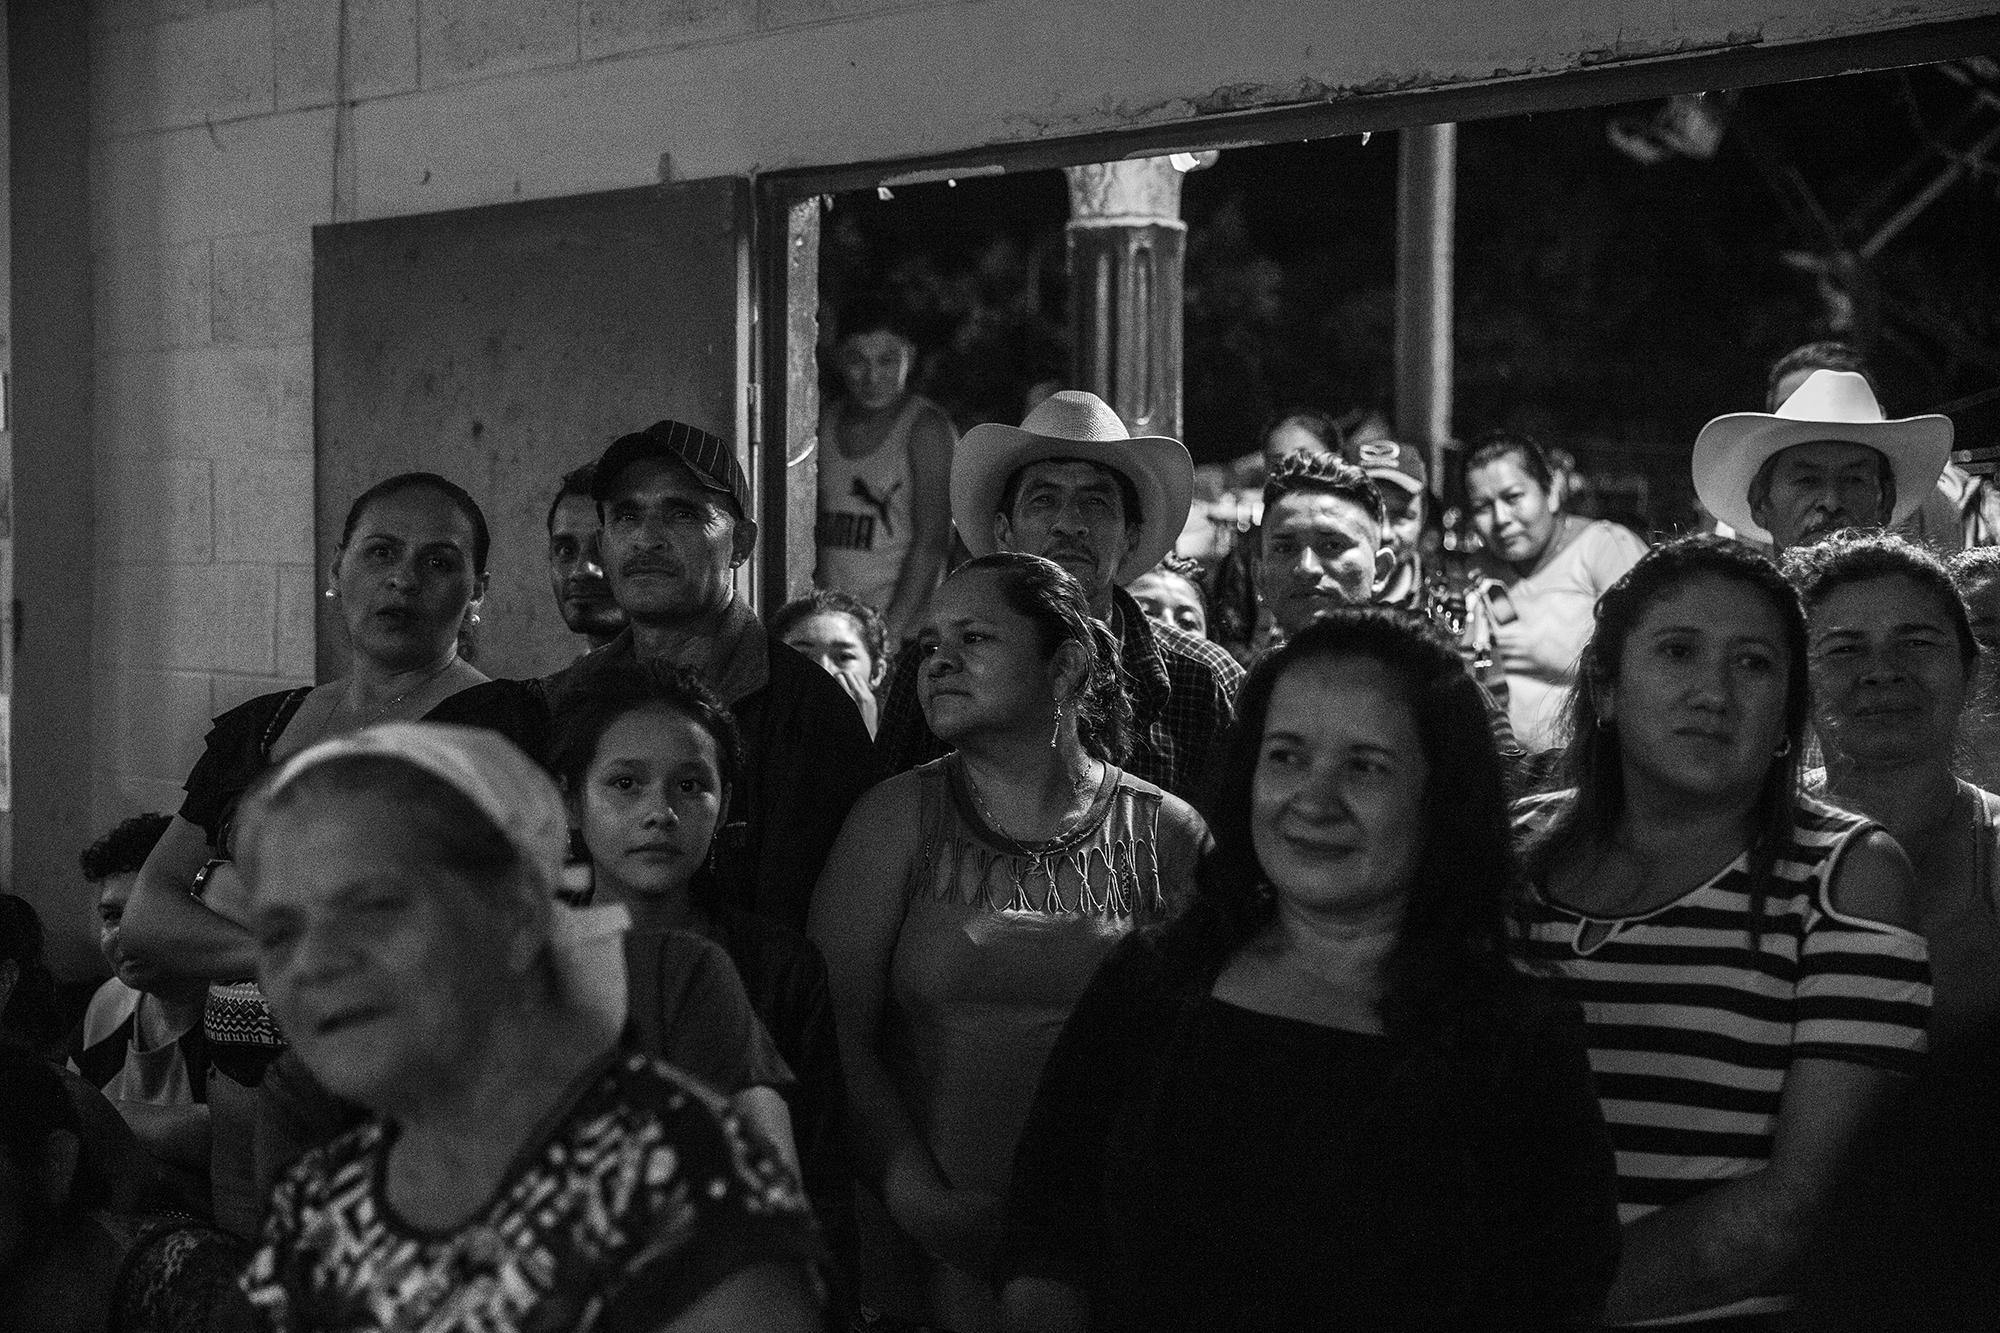 The generations of Santa Marta reunite. Children, adults, and the elderly enjoy the inaugural dance on the night of October 9, 2019. The community organizes two celebrations. One is geared toward adults and features a band playing Los Tigres del Norte cover songs. The other is for the youth, who prefer more modern music, like reggaeton.